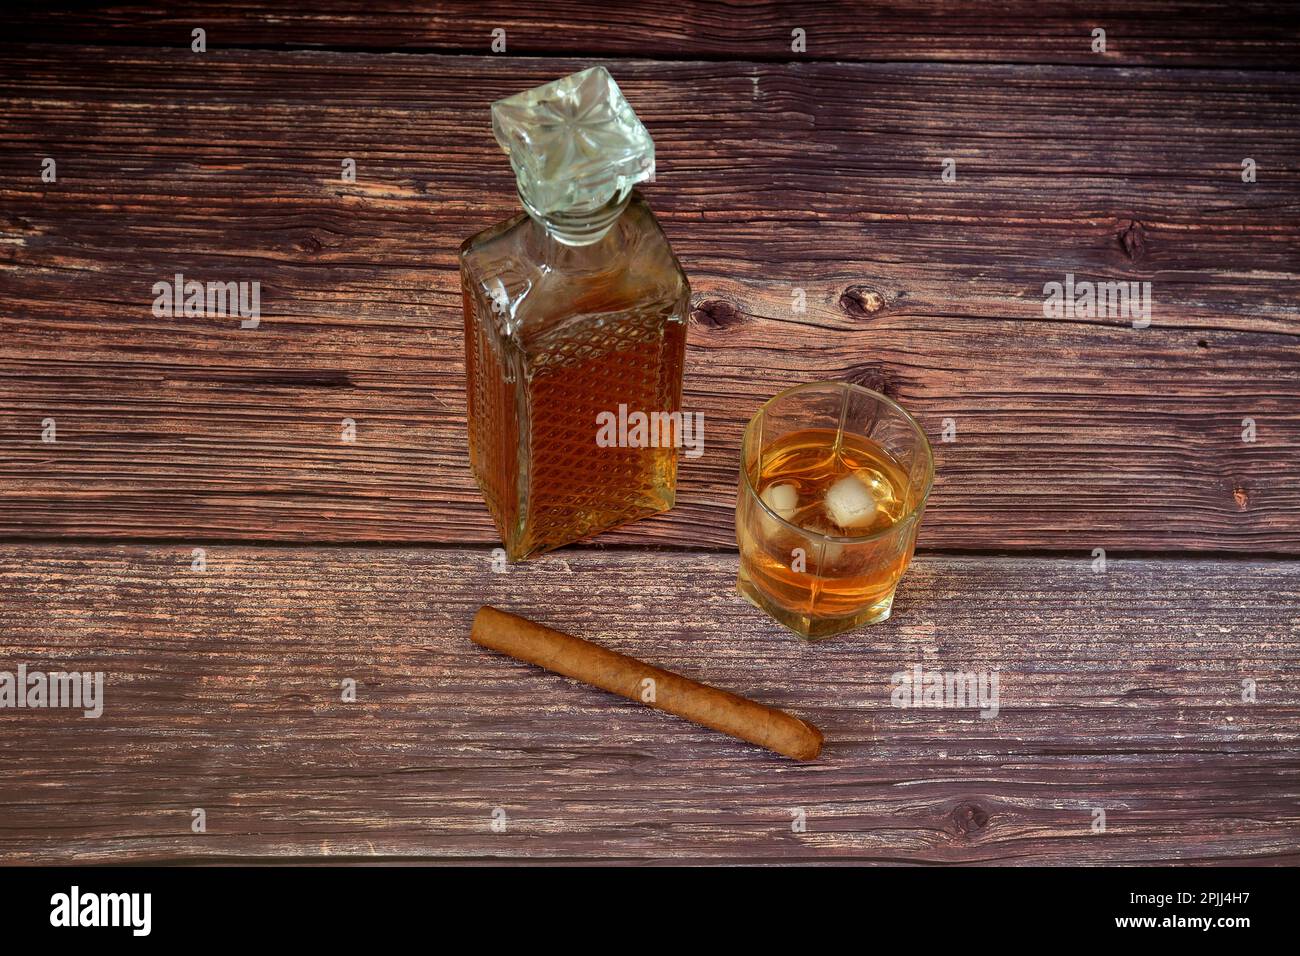 A glass glass of whiskey with ice, a crystal decanter with an alcoholic drink and a Cuban cigar on a wooden table. Close-up. Stock Photo